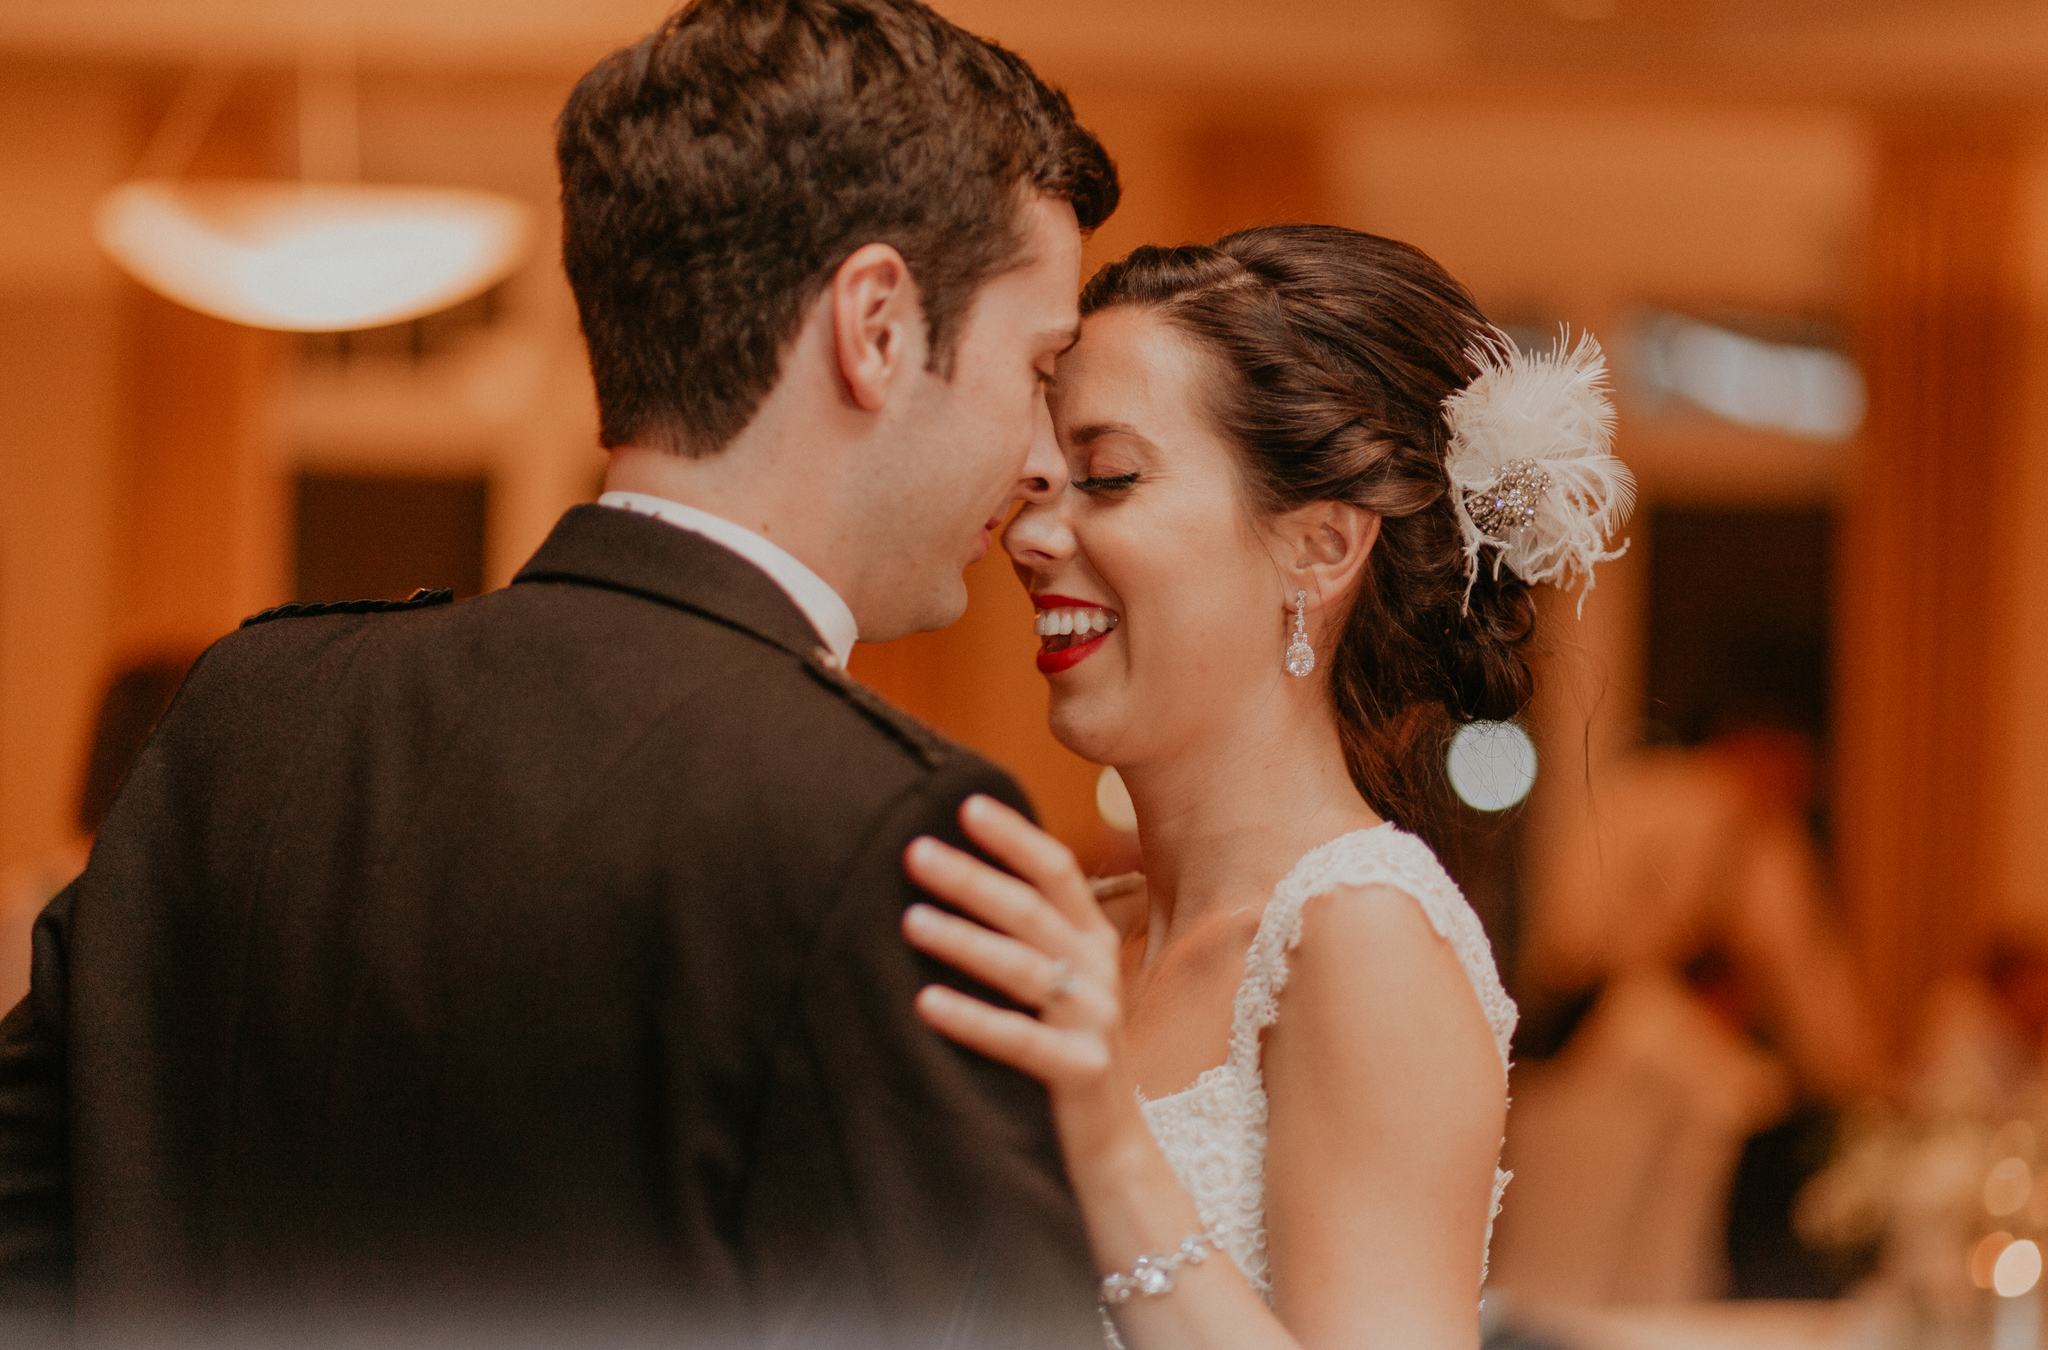 Bride and groom smile in candid documentary photograph picture during wedding reception 